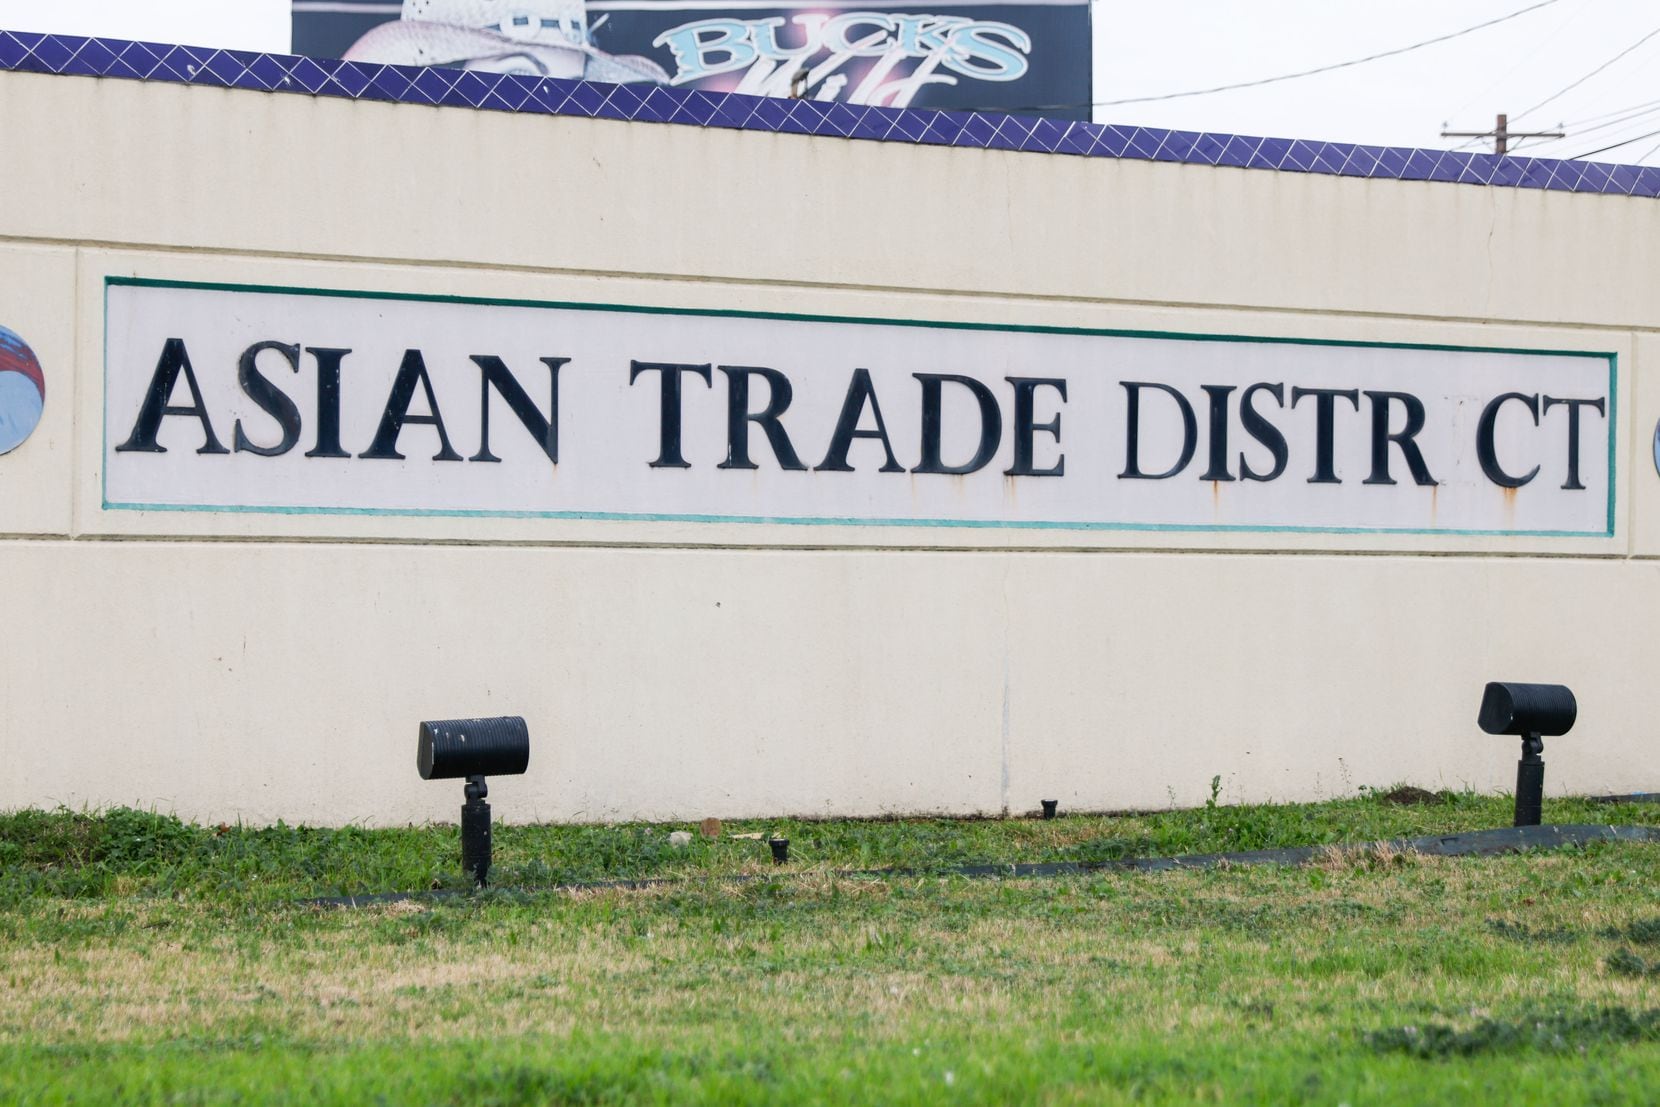 The Asian Trade District signs in Dallas, one of which is missing a letter, were envisioned...